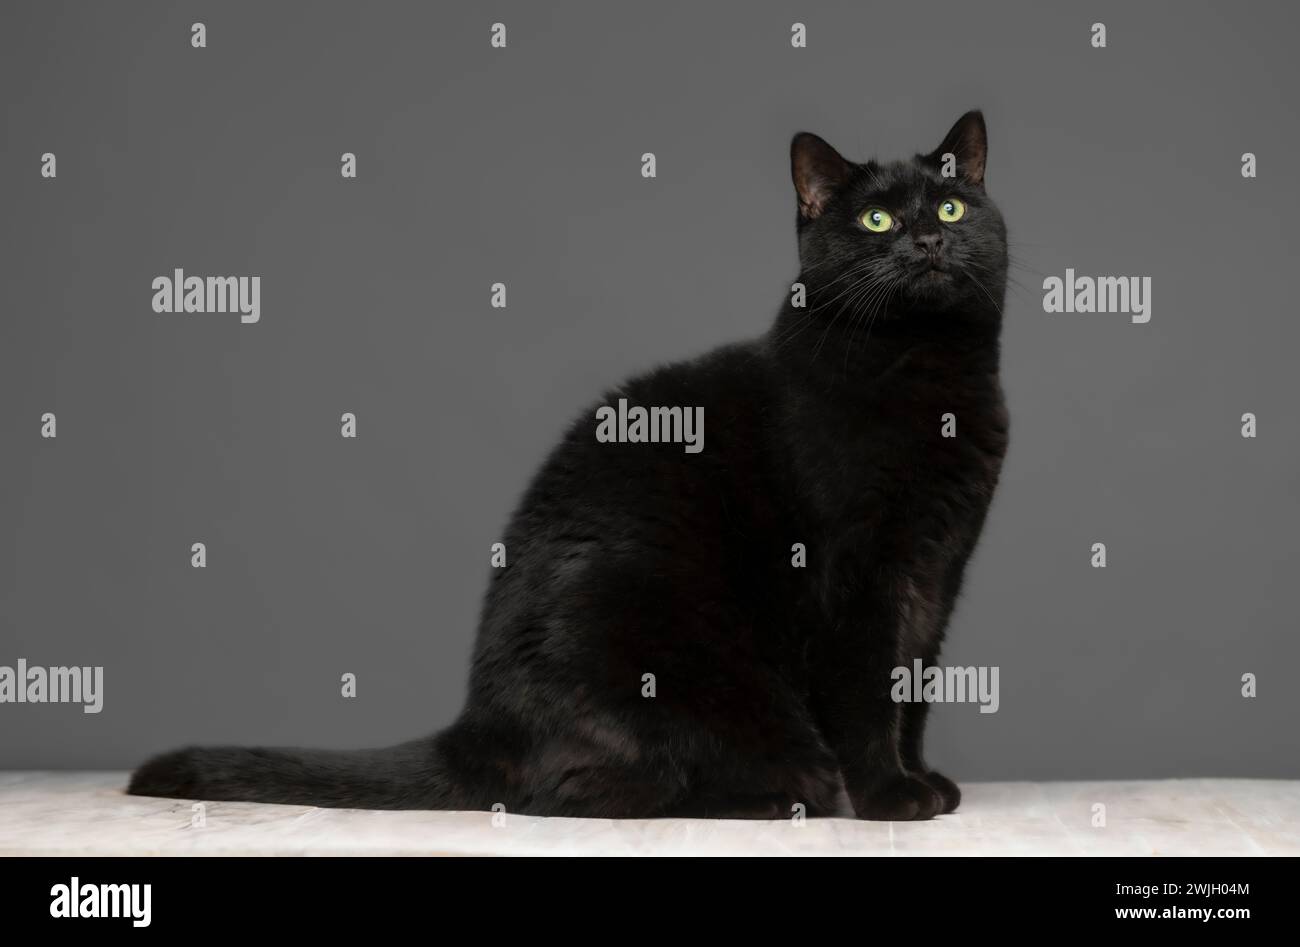 Studio shot of an adult short-haired black cat looking out of shot, sitting on a whitewashed table seen against a grey background. Stock Photo